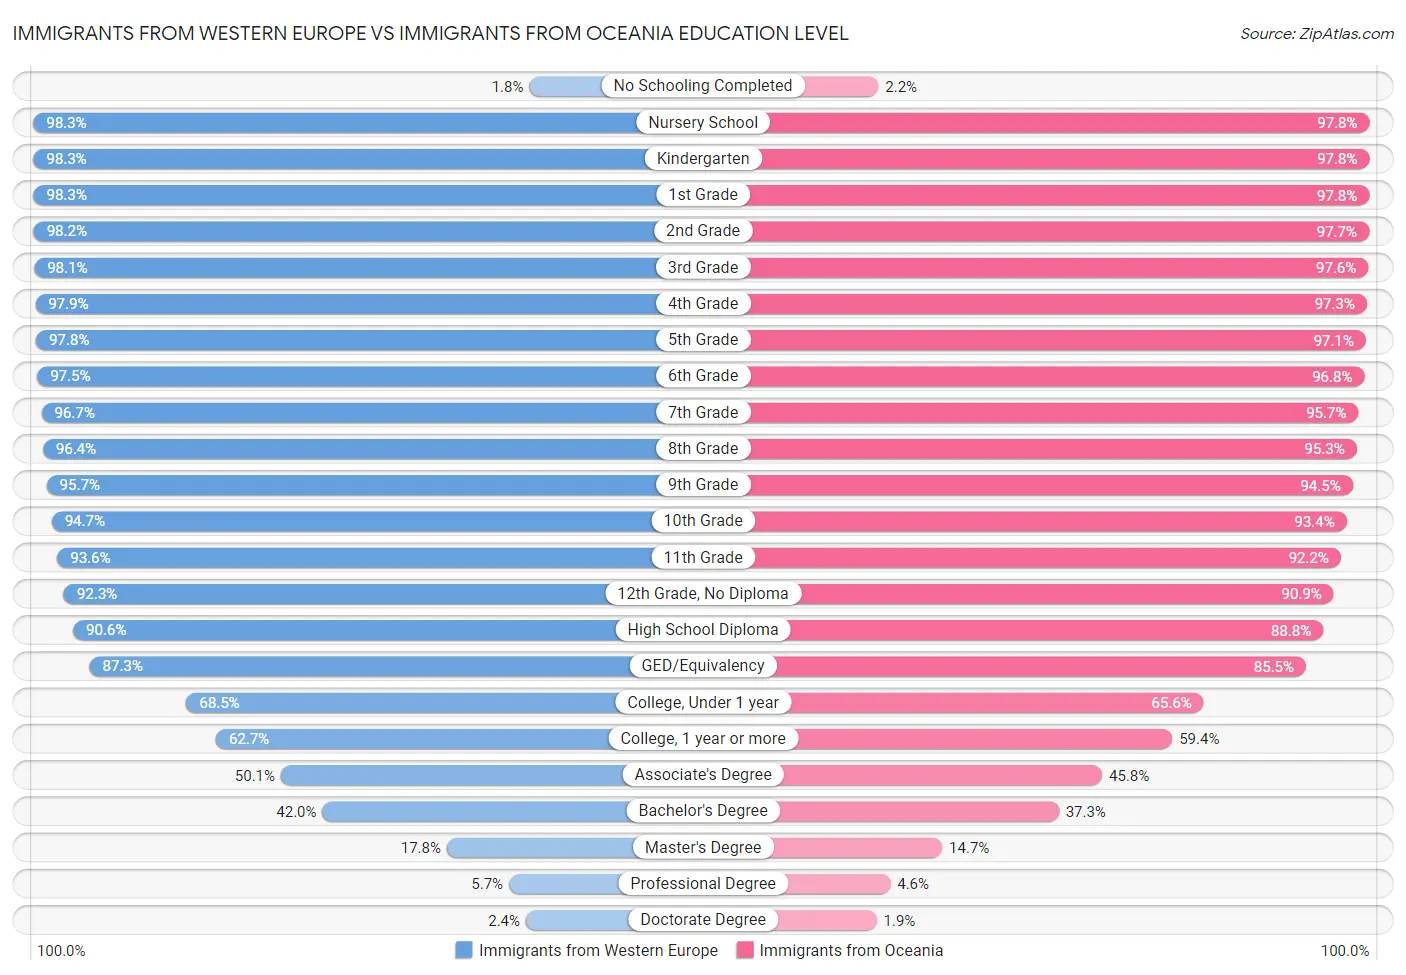 Immigrants from Western Europe vs Immigrants from Oceania Education Level